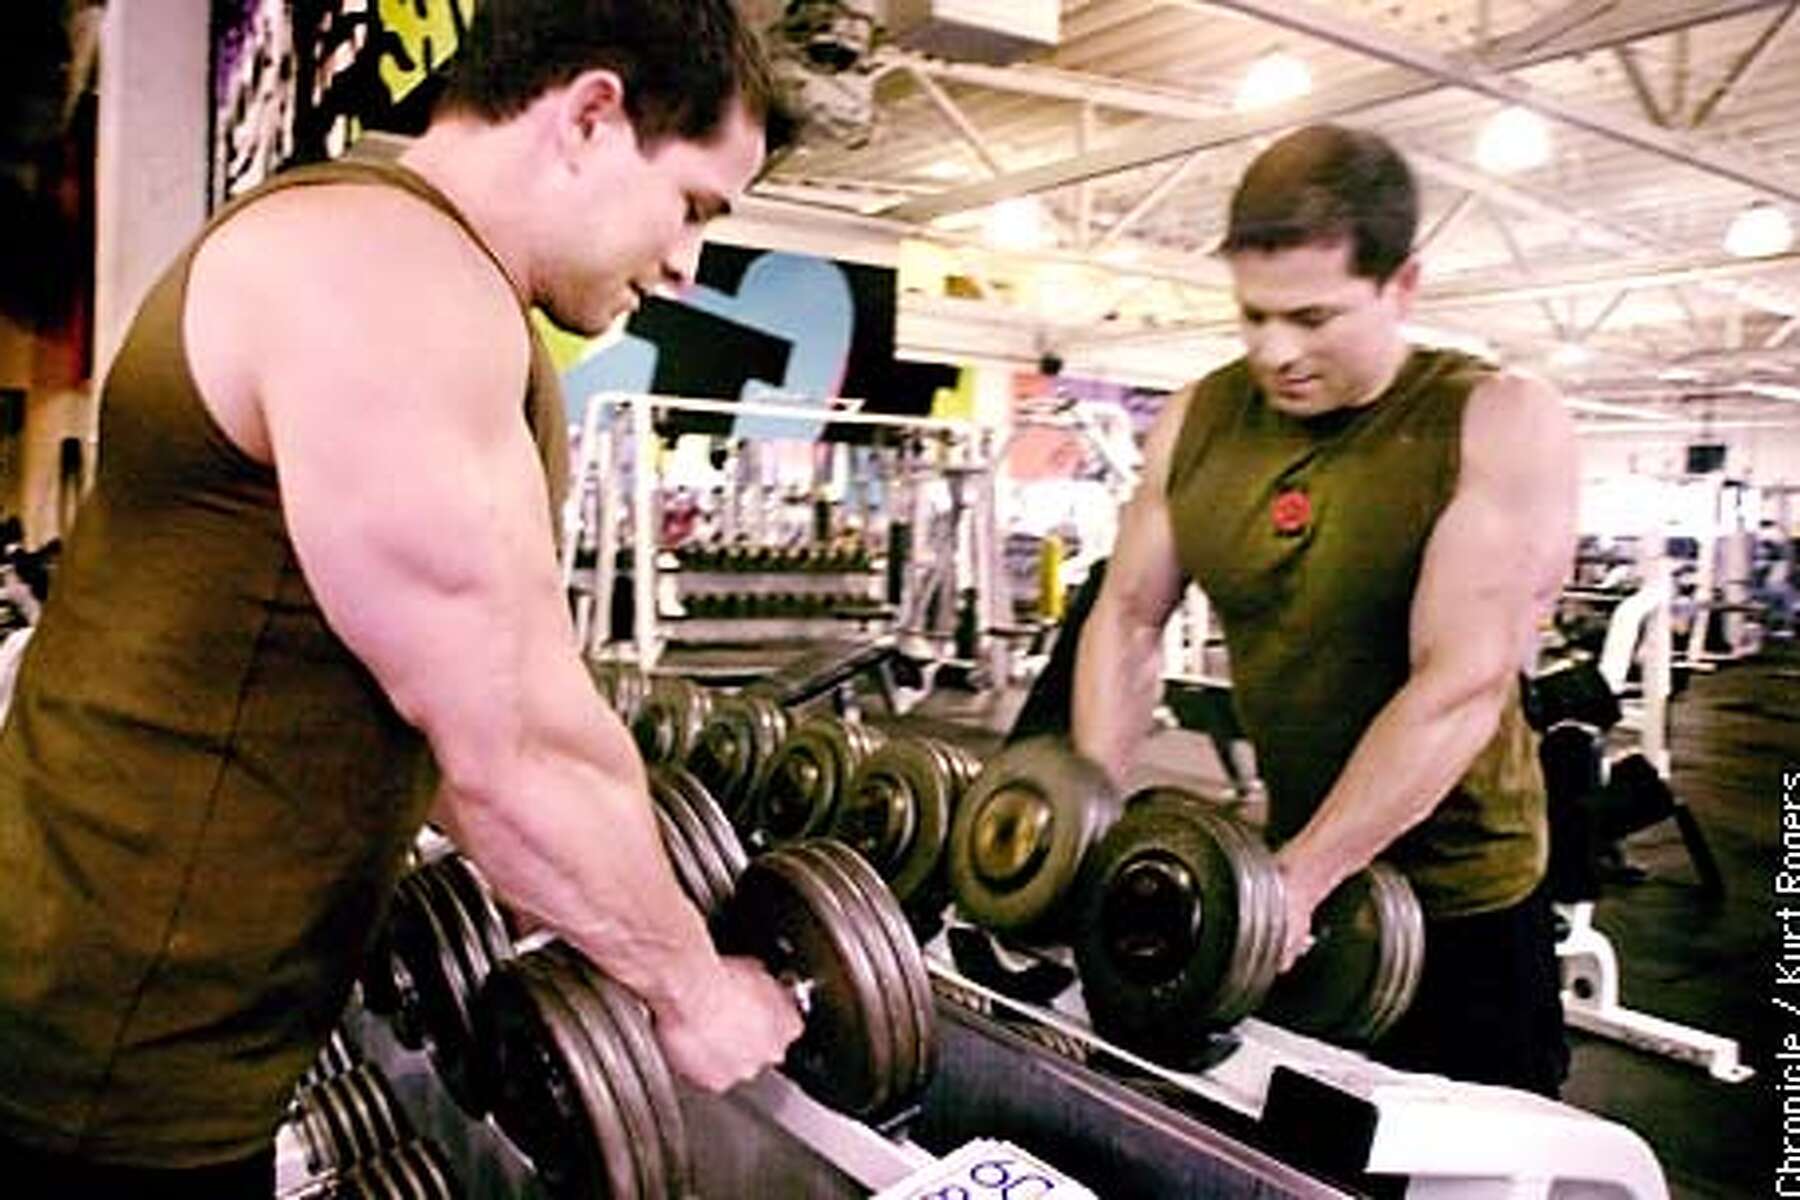 Steroid use rampant in Bay gyms / Athletes like results, overlook dangers